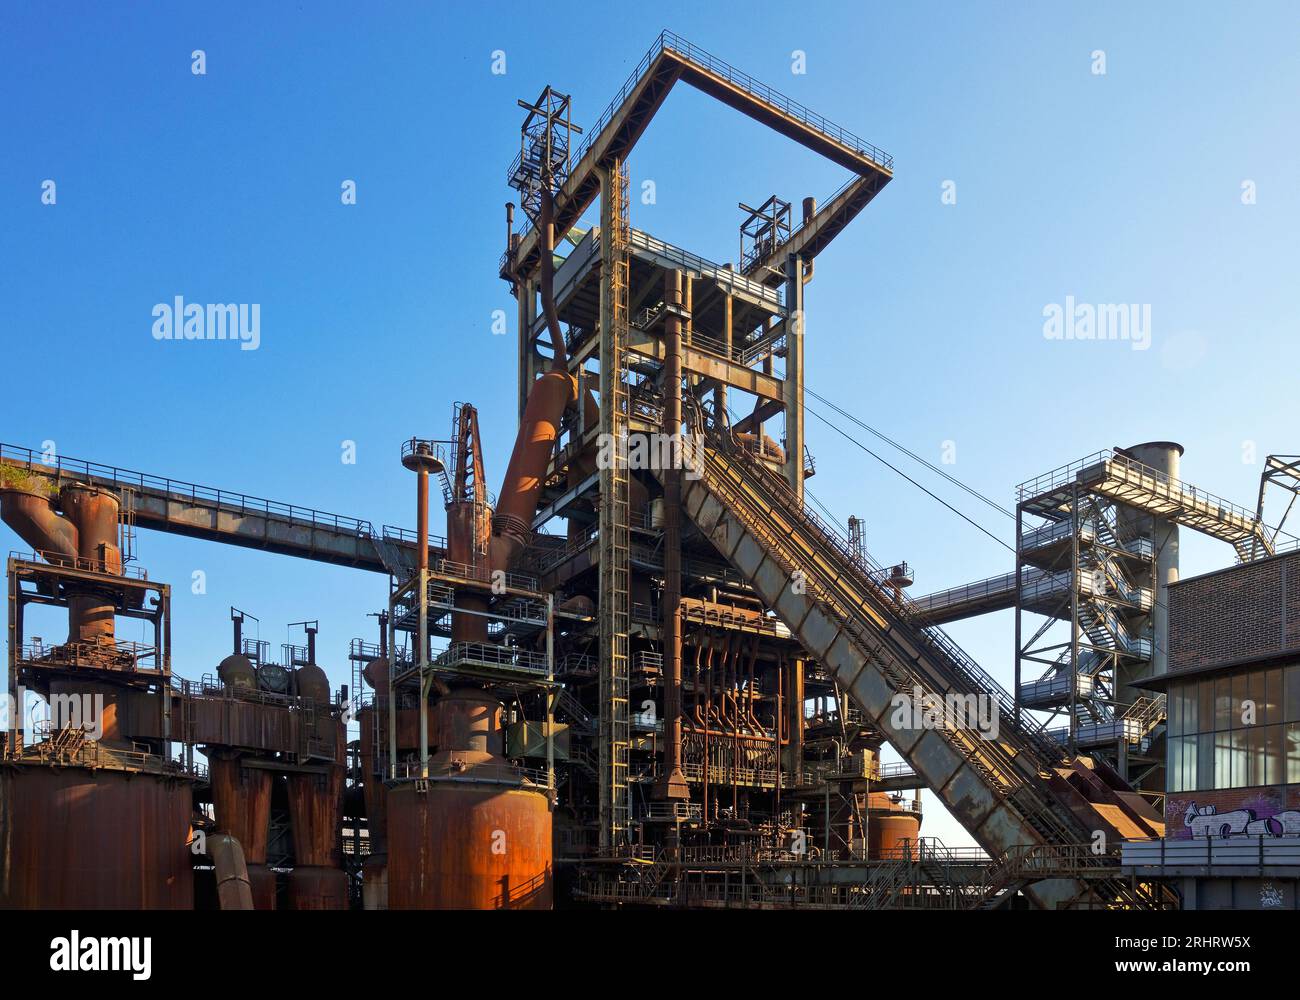 blast furnace, decommissioned industrial plant Phoenix-West in the Hoerde district, Germany, North Rhine-Westphalia, Ruhr Area, Dortmund Stock Photo